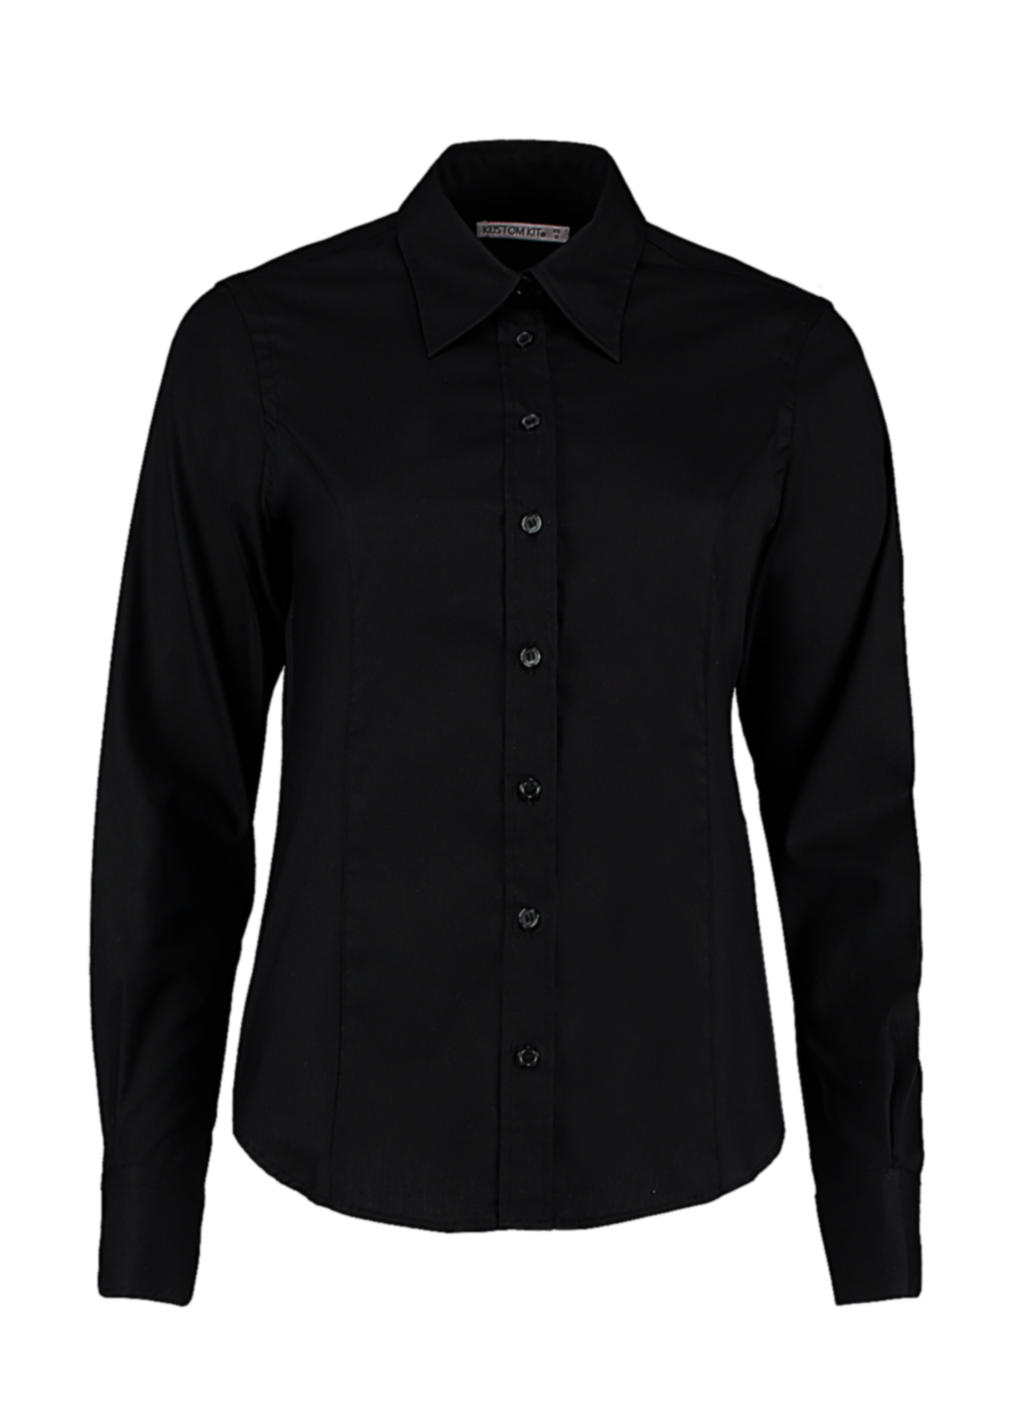  Womens Tailored Fit Premium Oxford Shirt in Farbe Black